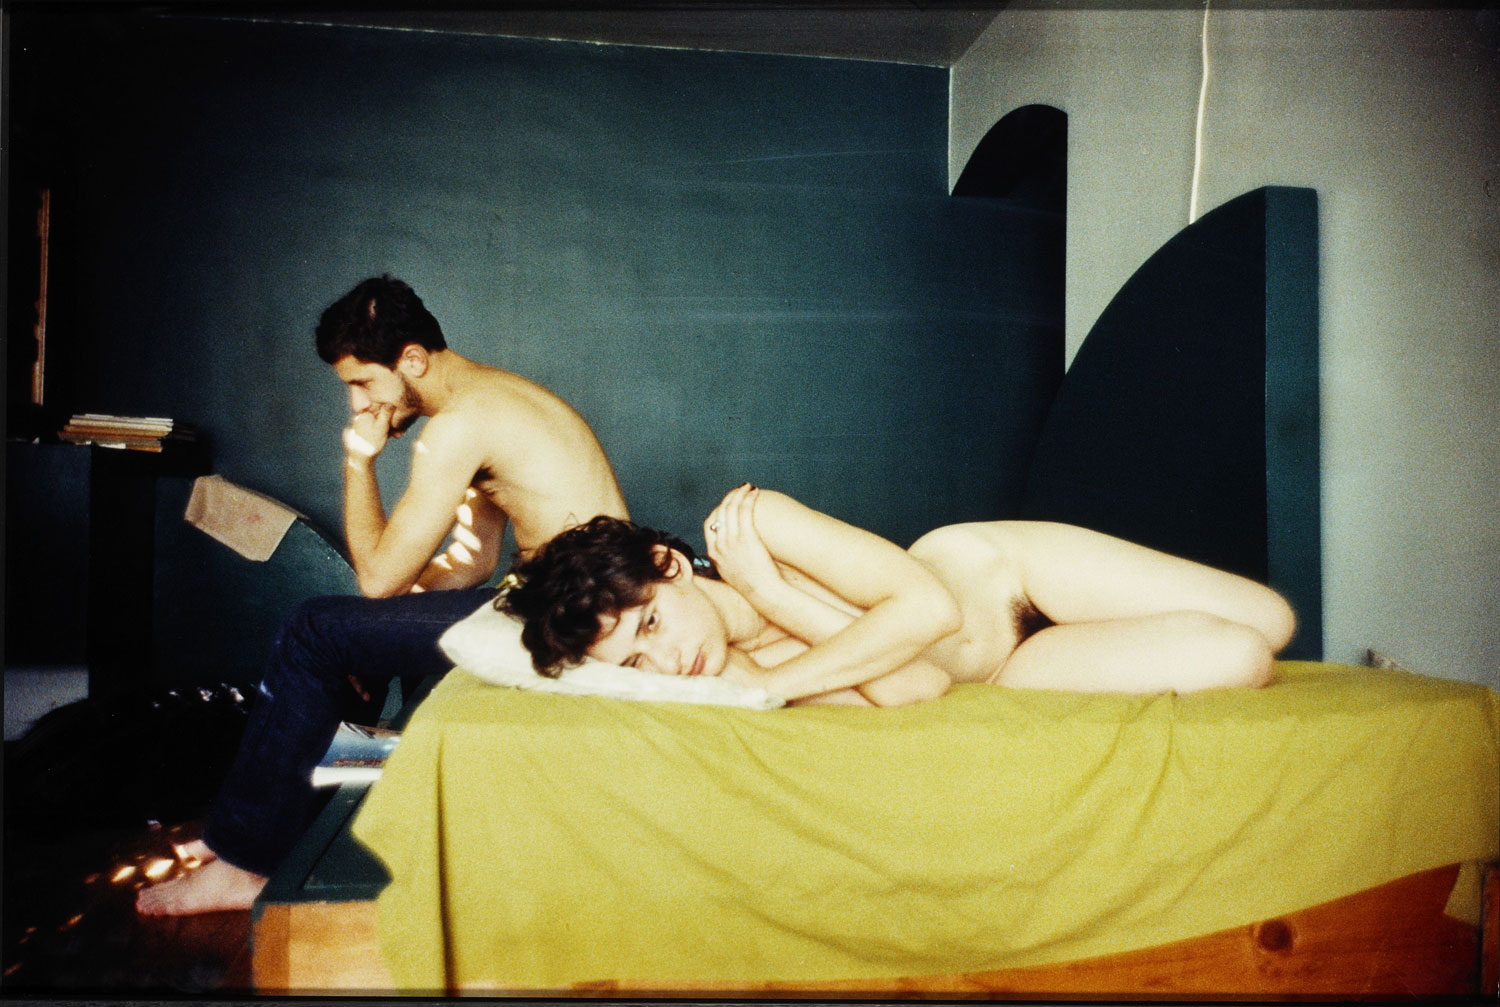 Nan Goldin, Couple in bed, Chicago, 1977